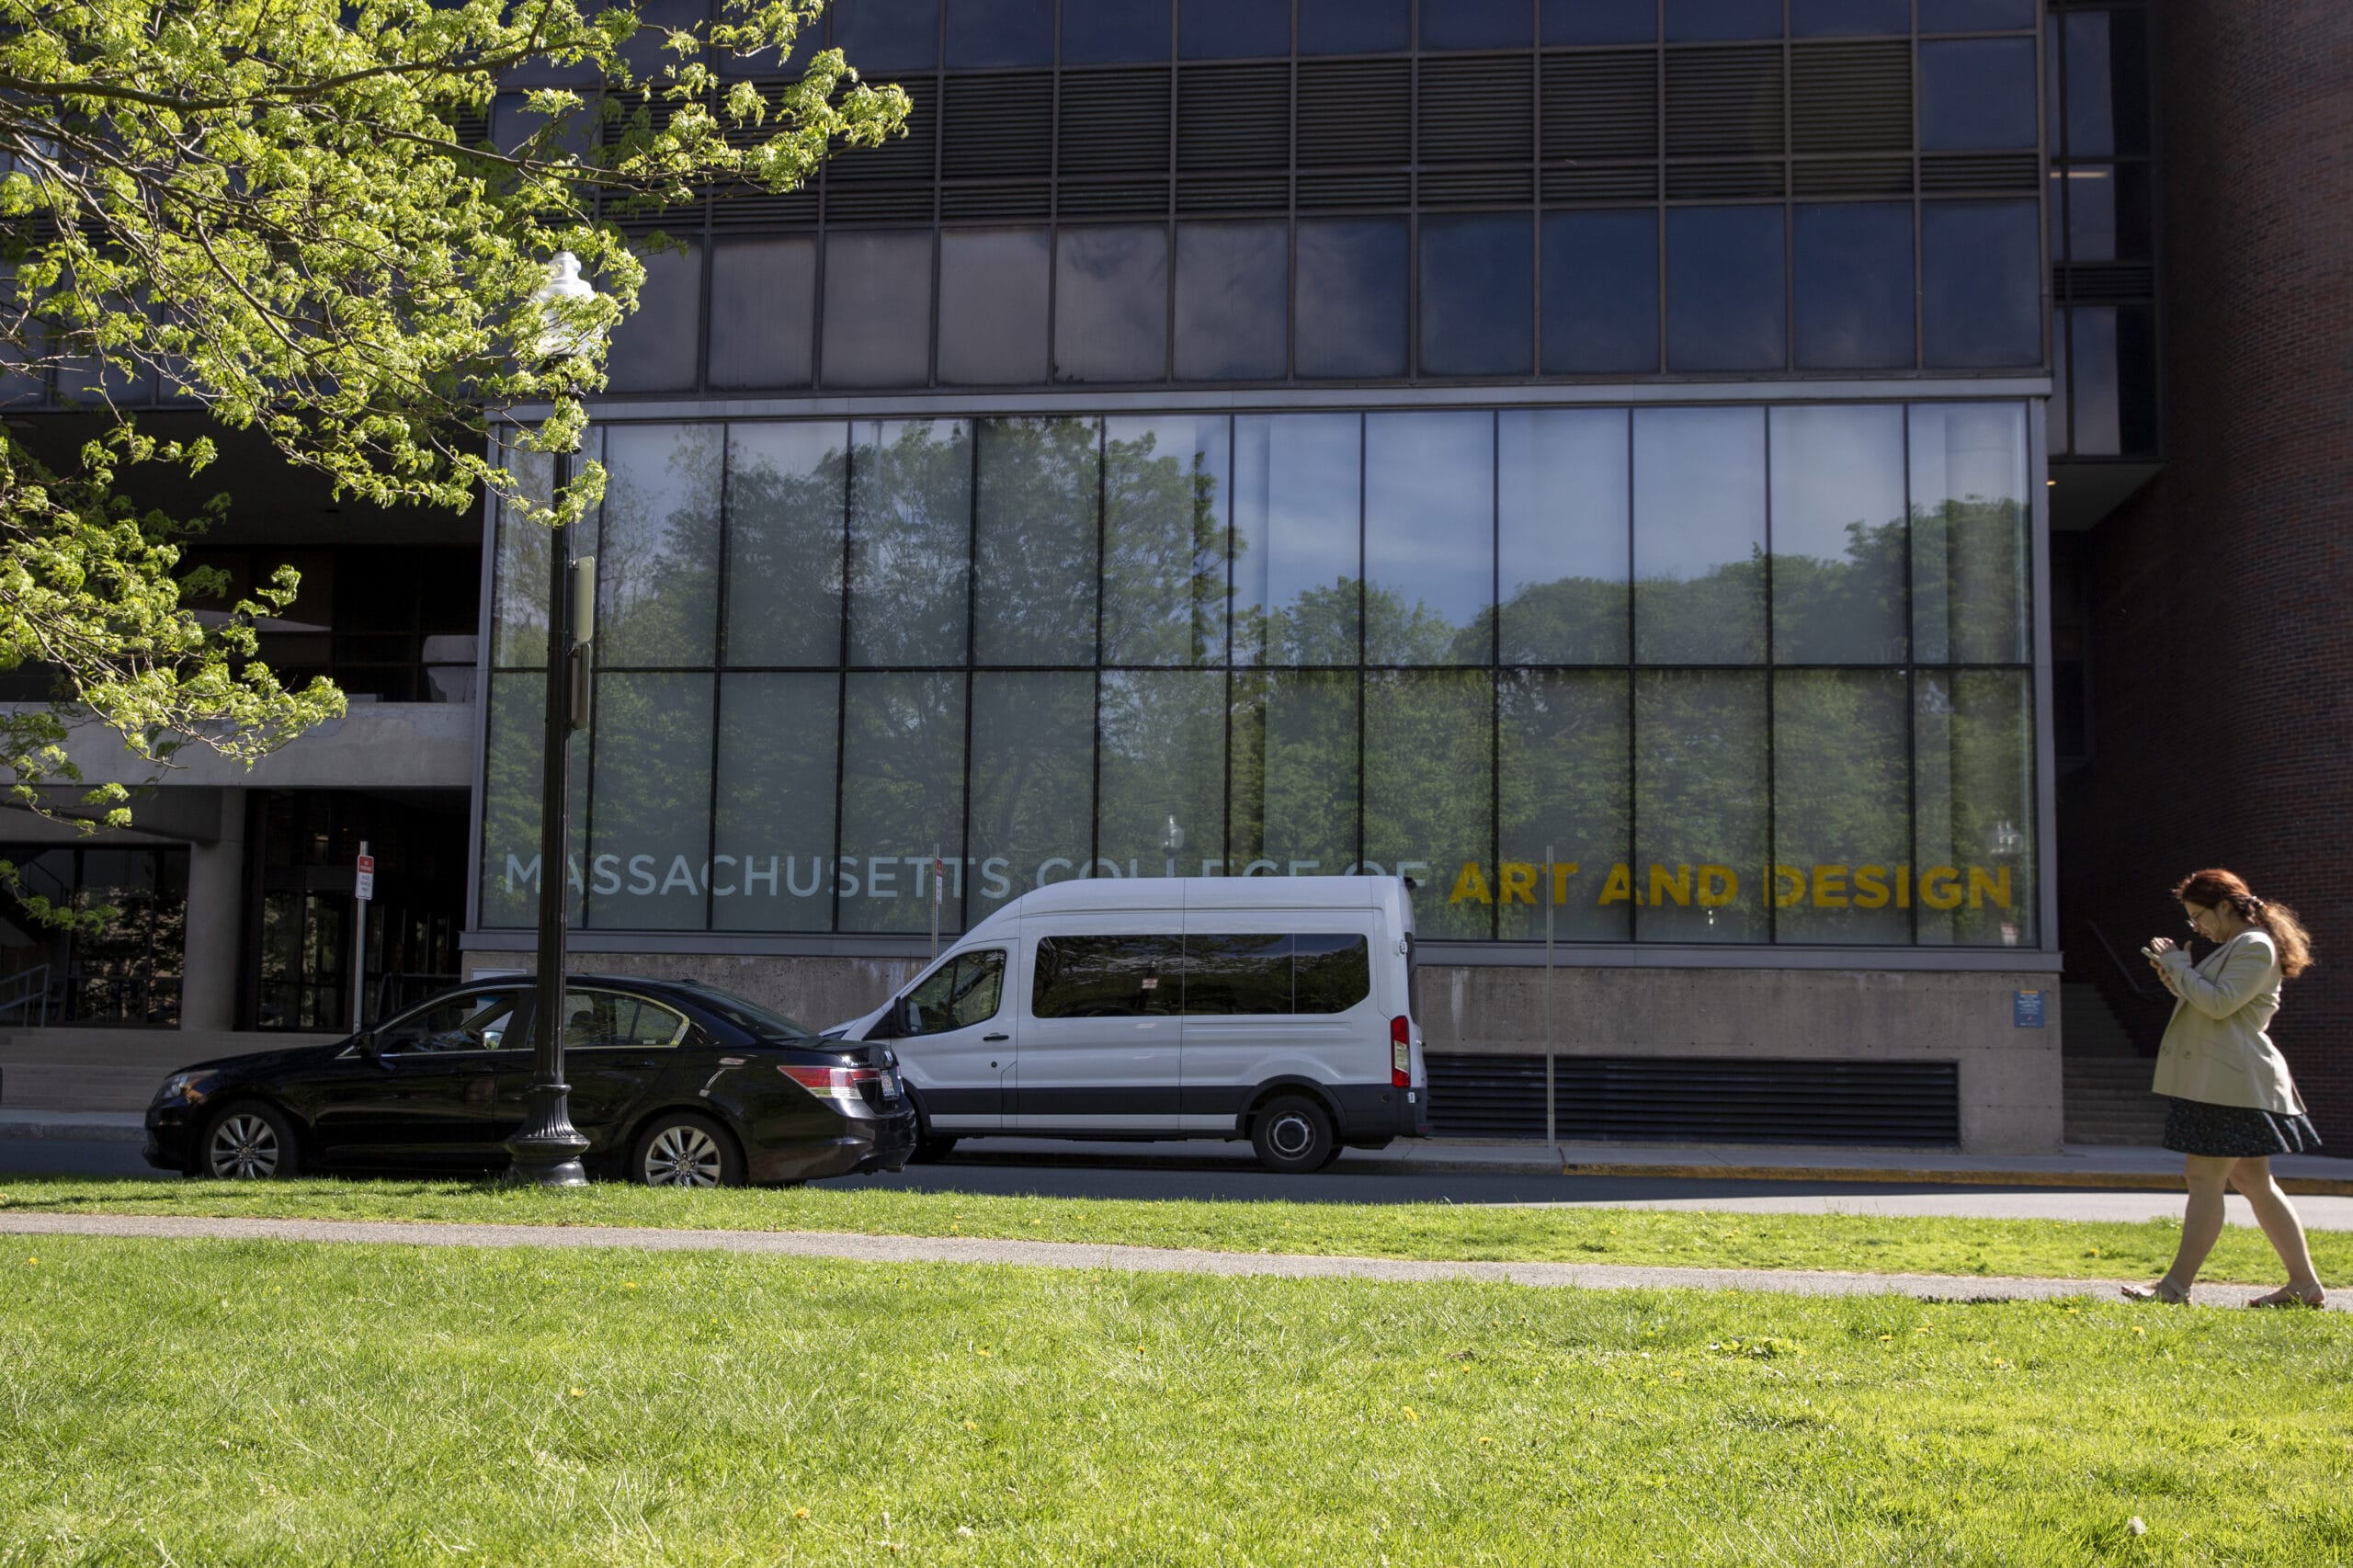 A shuttle bus parked in front of the a building at Massachusetts College of Art and Design.